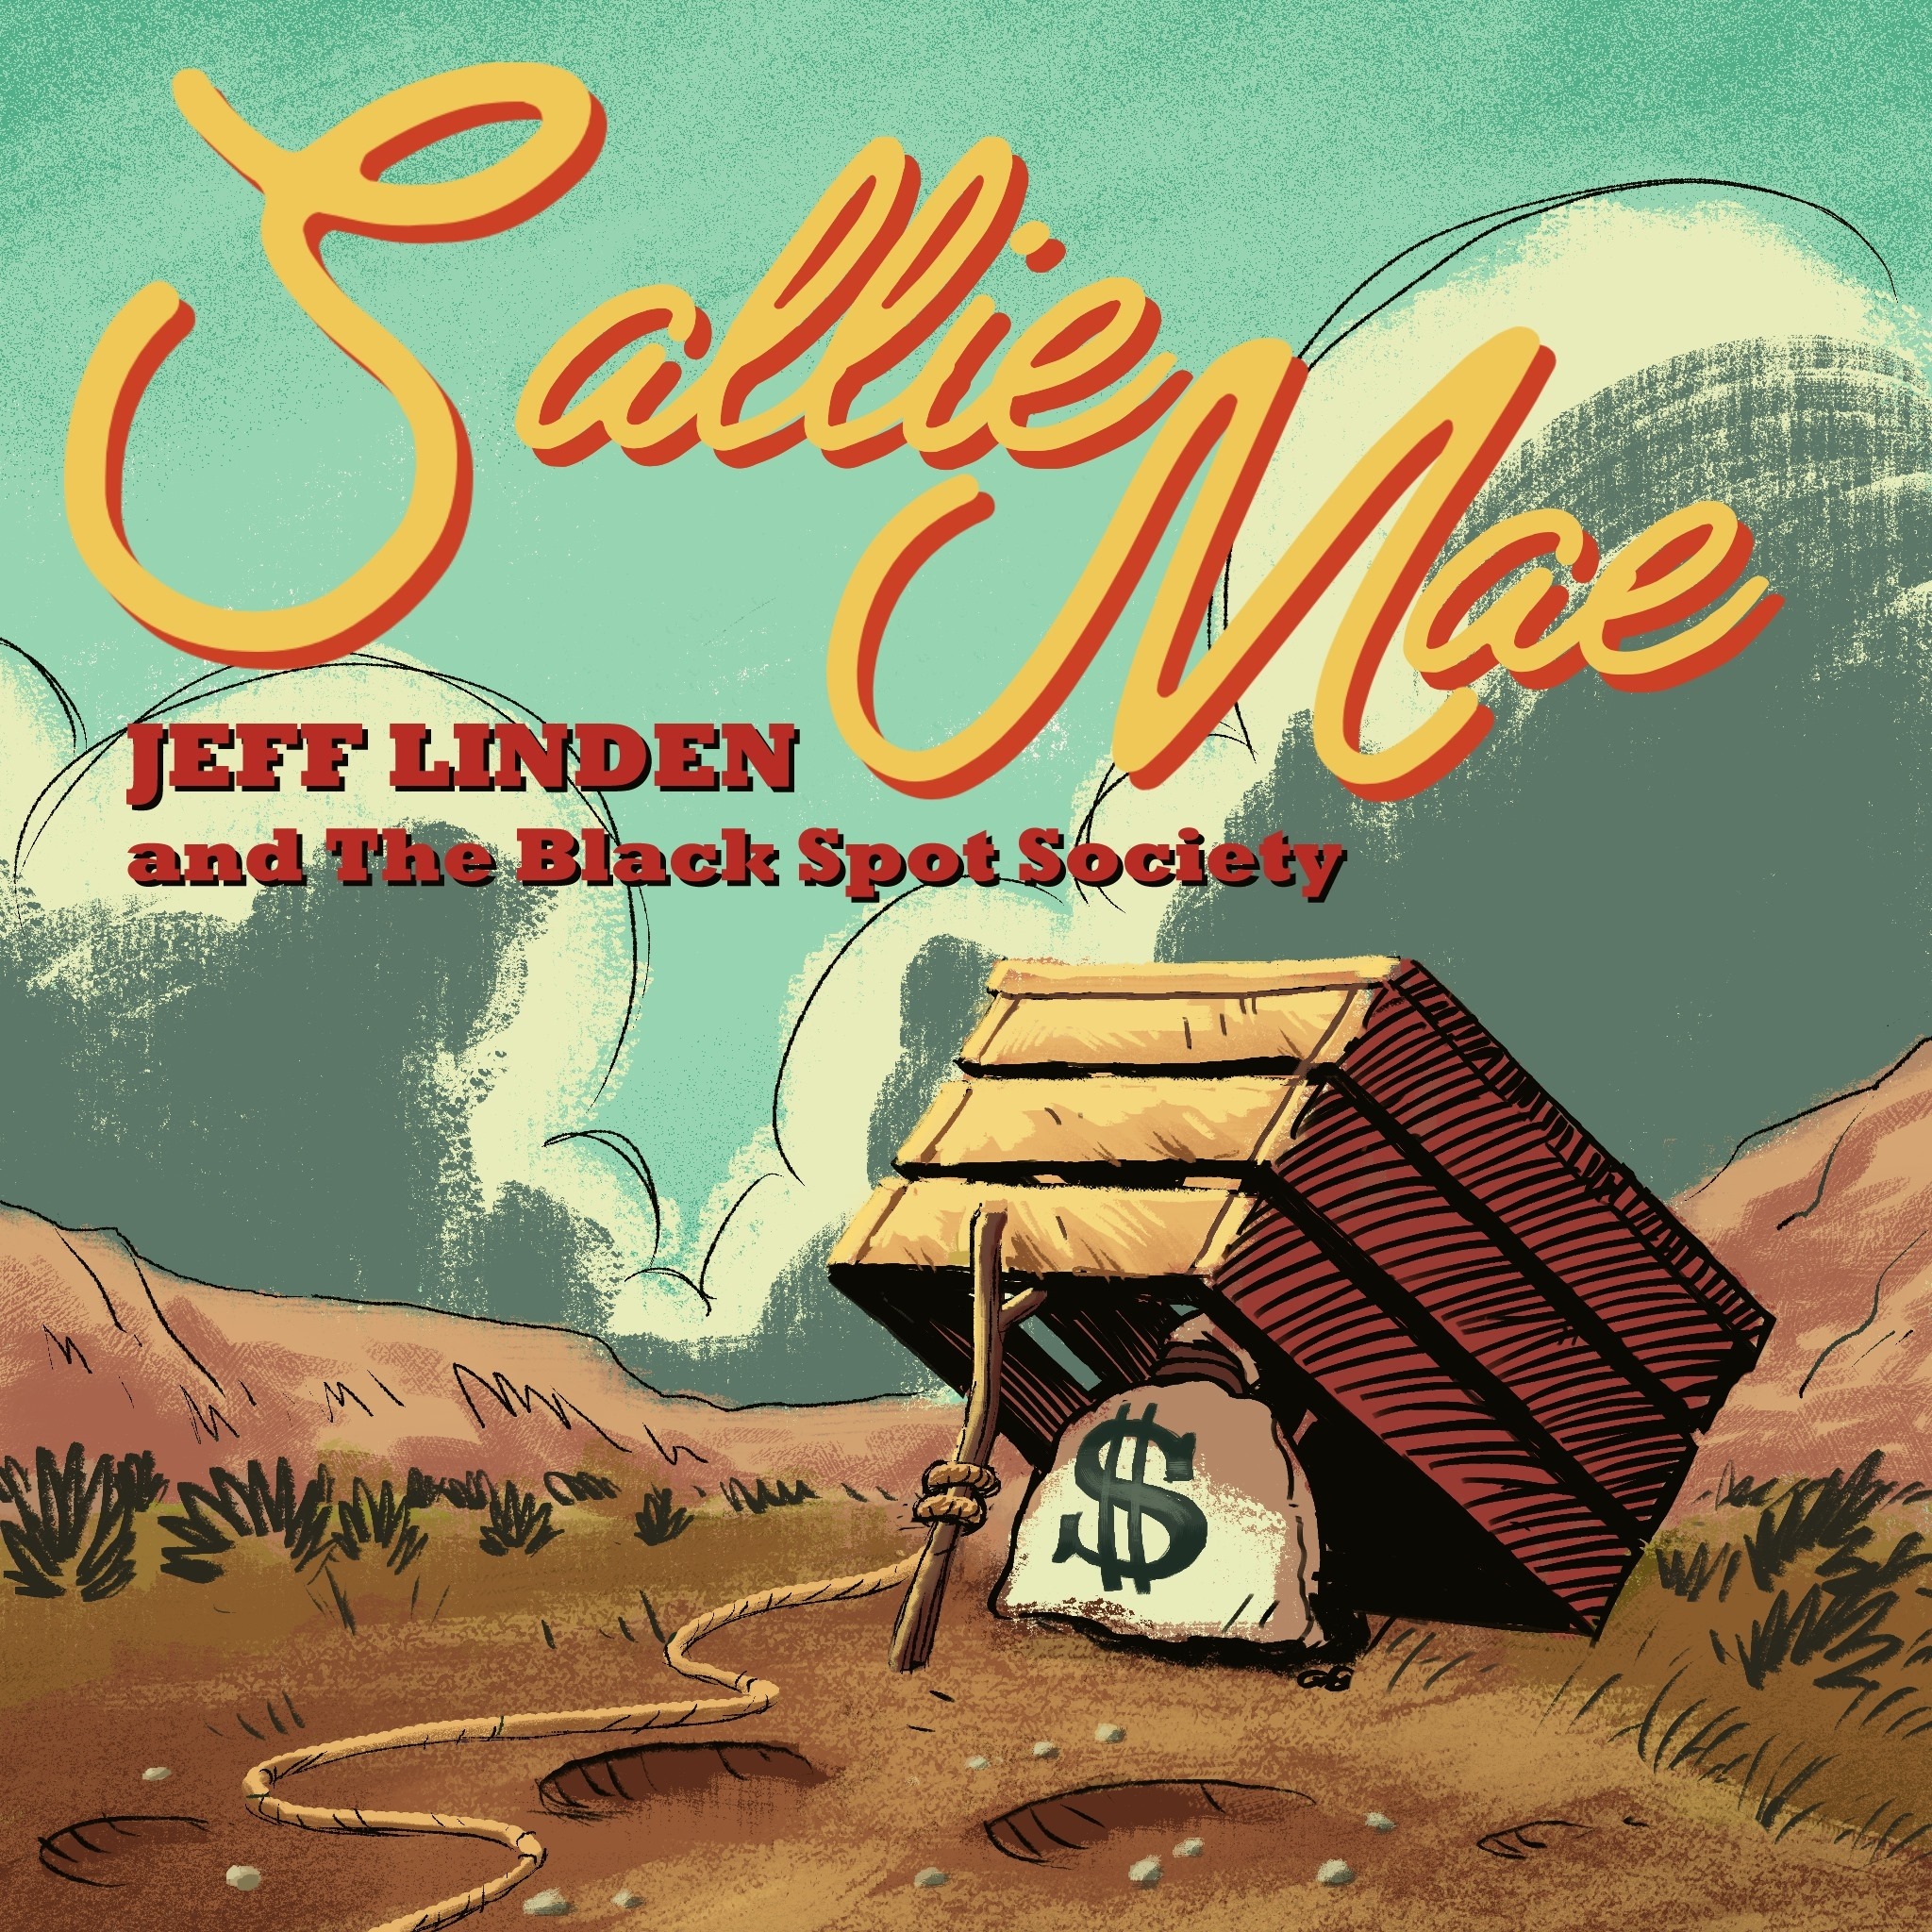 Jeff Linden and The Black Spot Society Sallie Mae